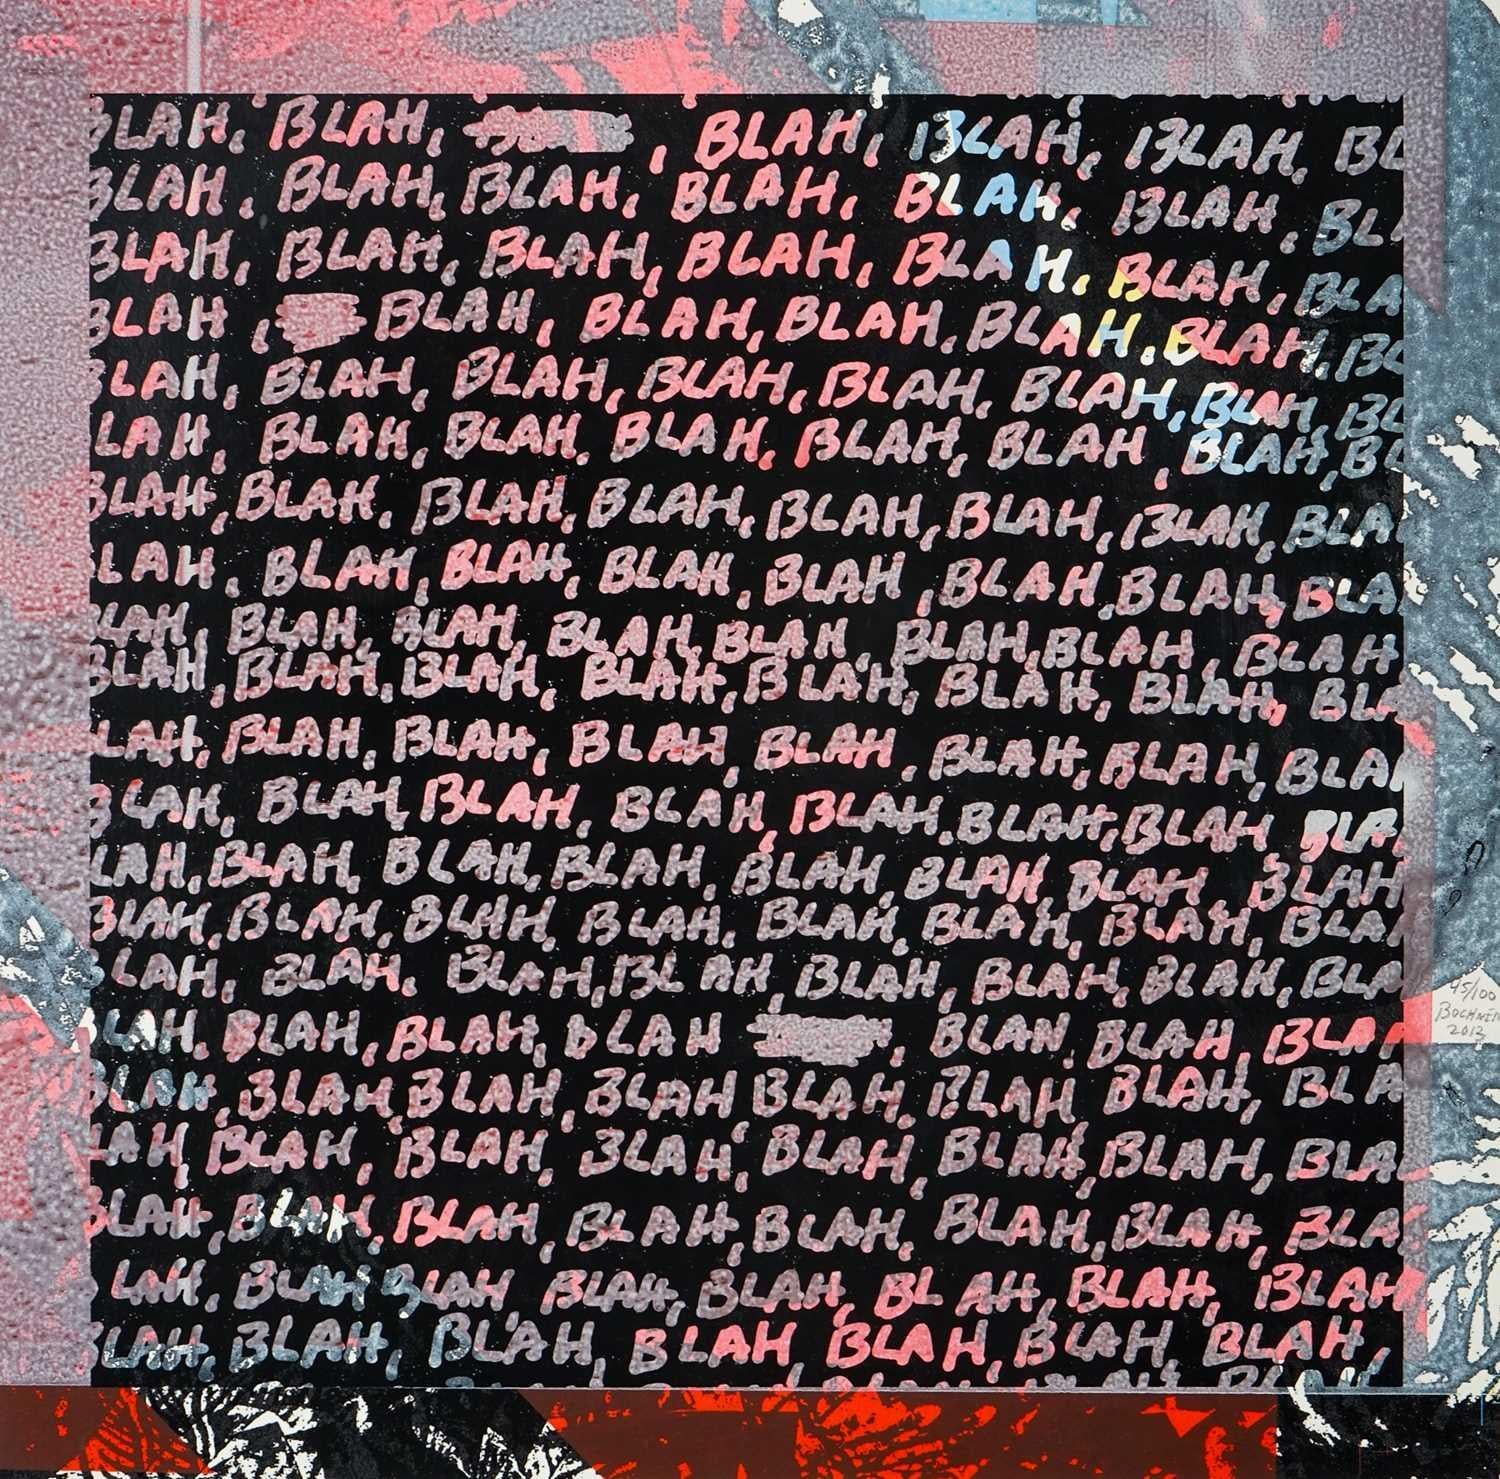 Blah, Blah, Blah + Background Noise, 2013
Mel Bochner

Double sided screenprint on printed paper
A unique colour variant
Signed, dated and numbered from the edition of 100 (each unique)
Sheet: 38 × 38 cm (14.9 × 14.9 in)

Reversible screenprint with